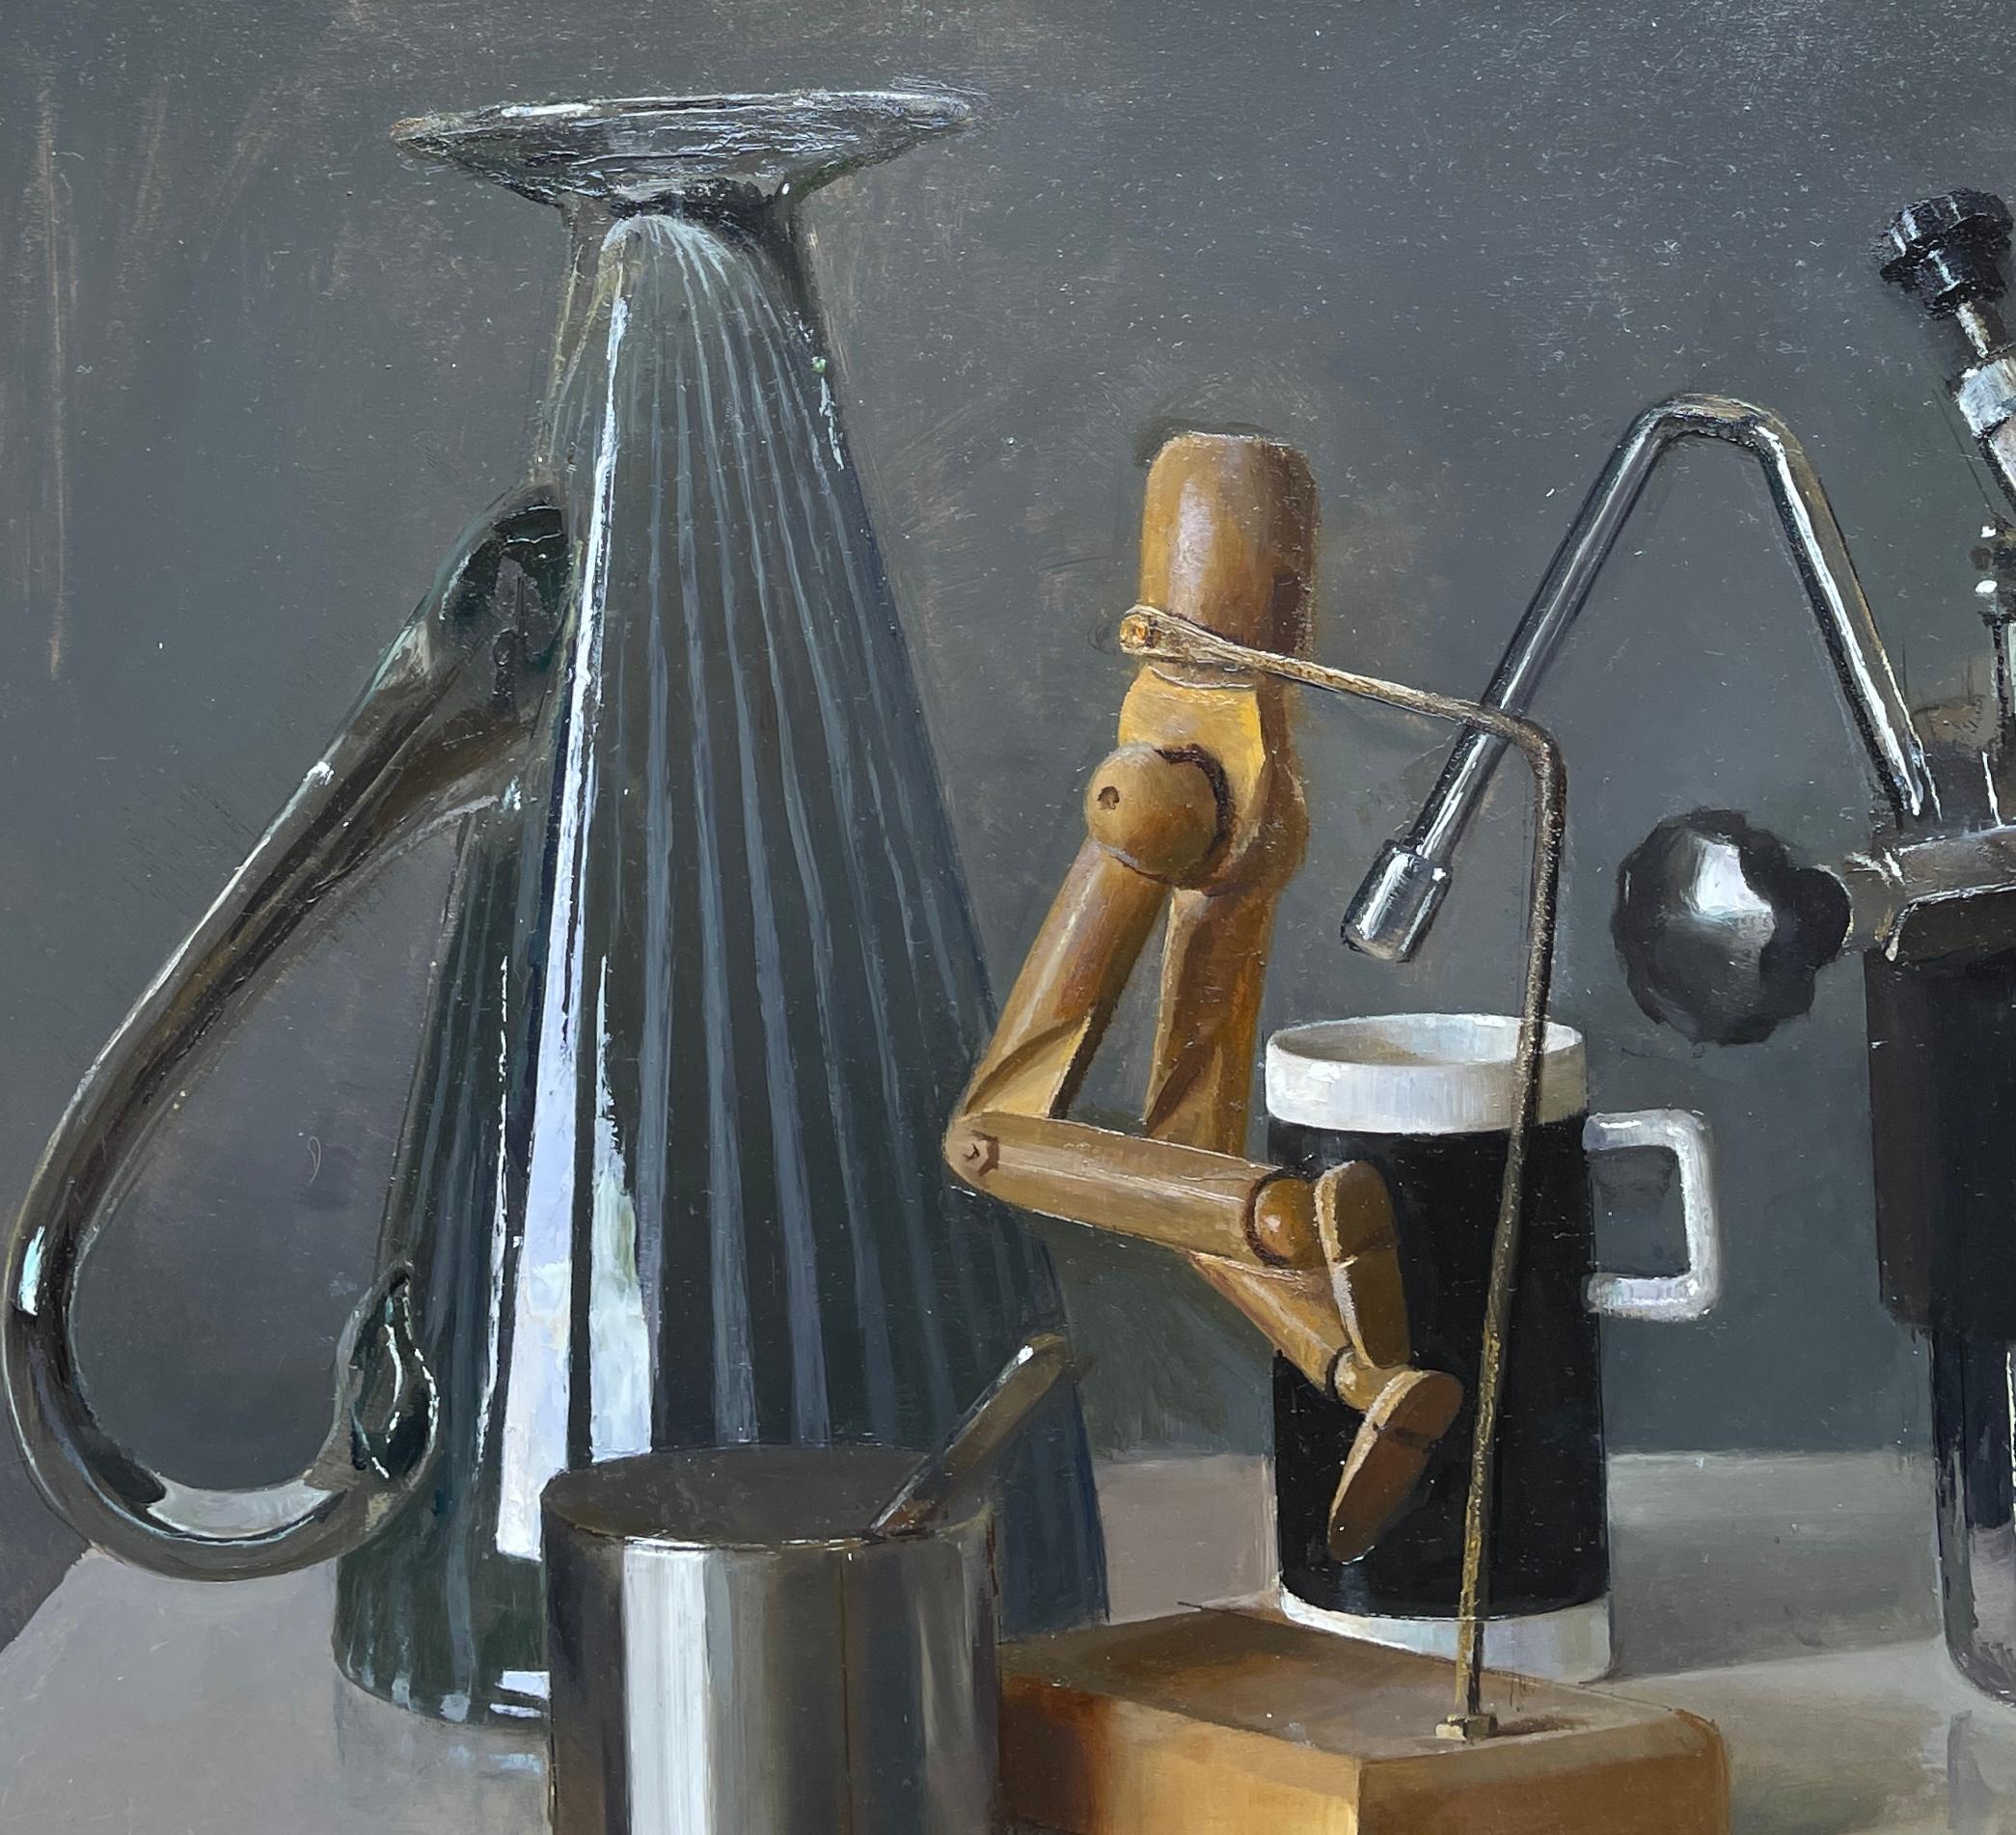 Hand-Painted Still Life with Italian Coffee Maker, Lay Figures & Bowls, Original Oil Painting